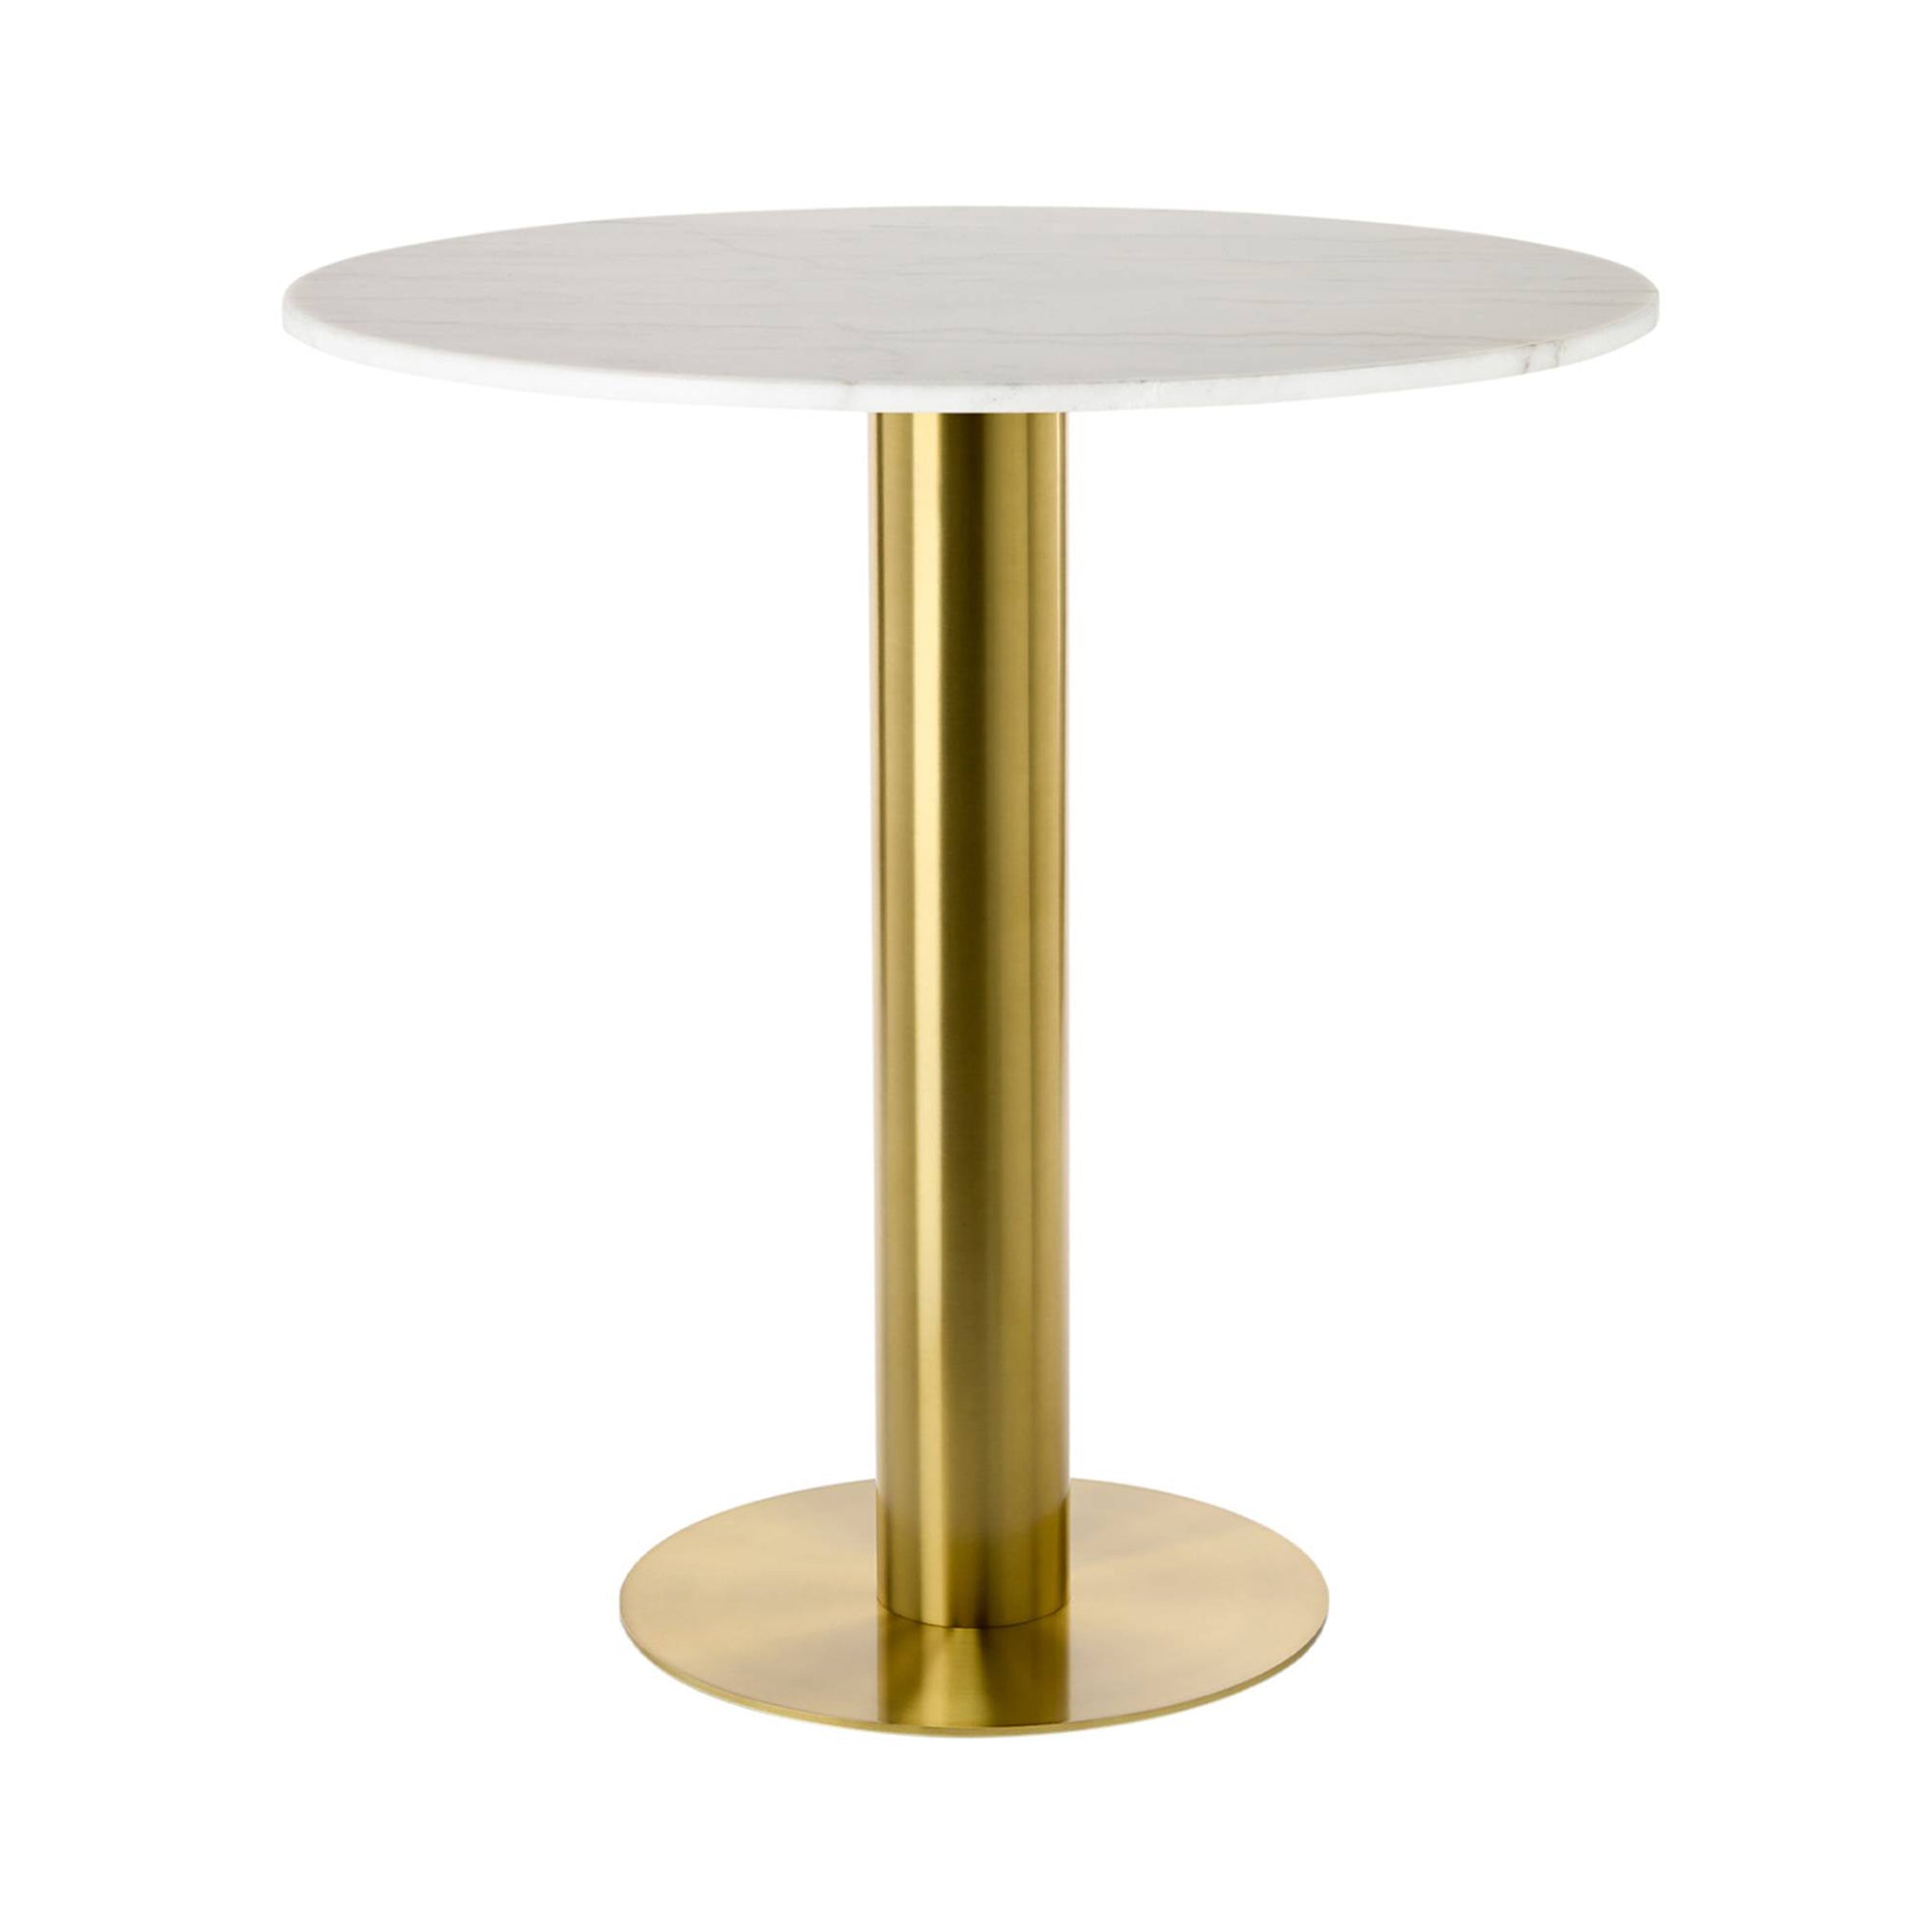 Tube High Table: Large - 35.4